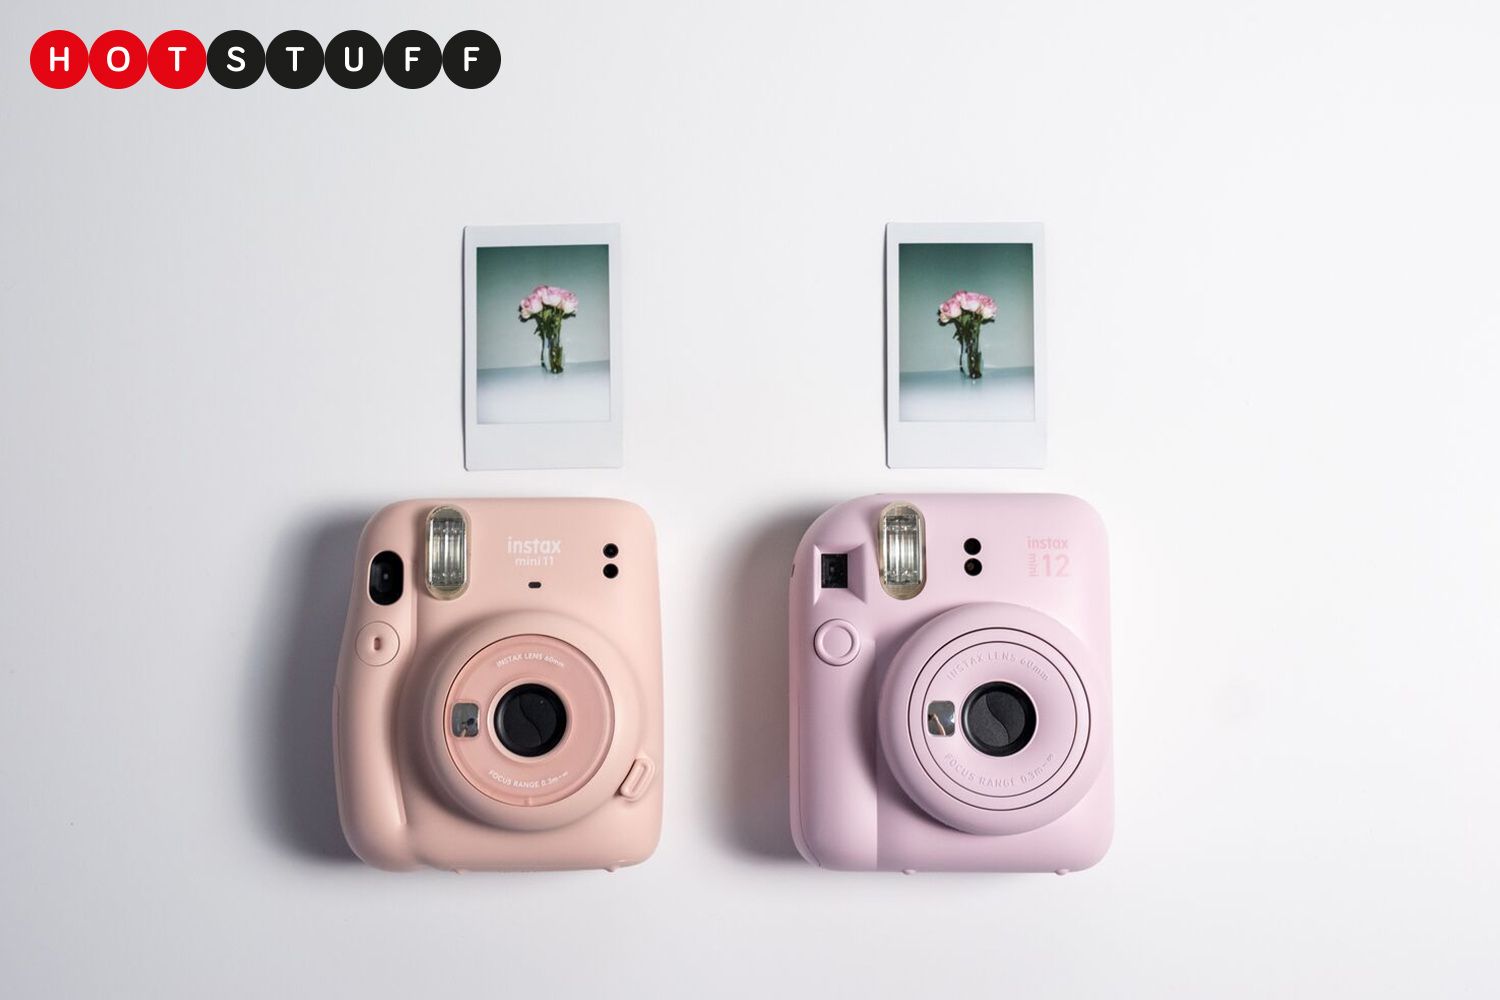 Fujifilm Instax Mini 12 Review: Looks like a toy, functions like a